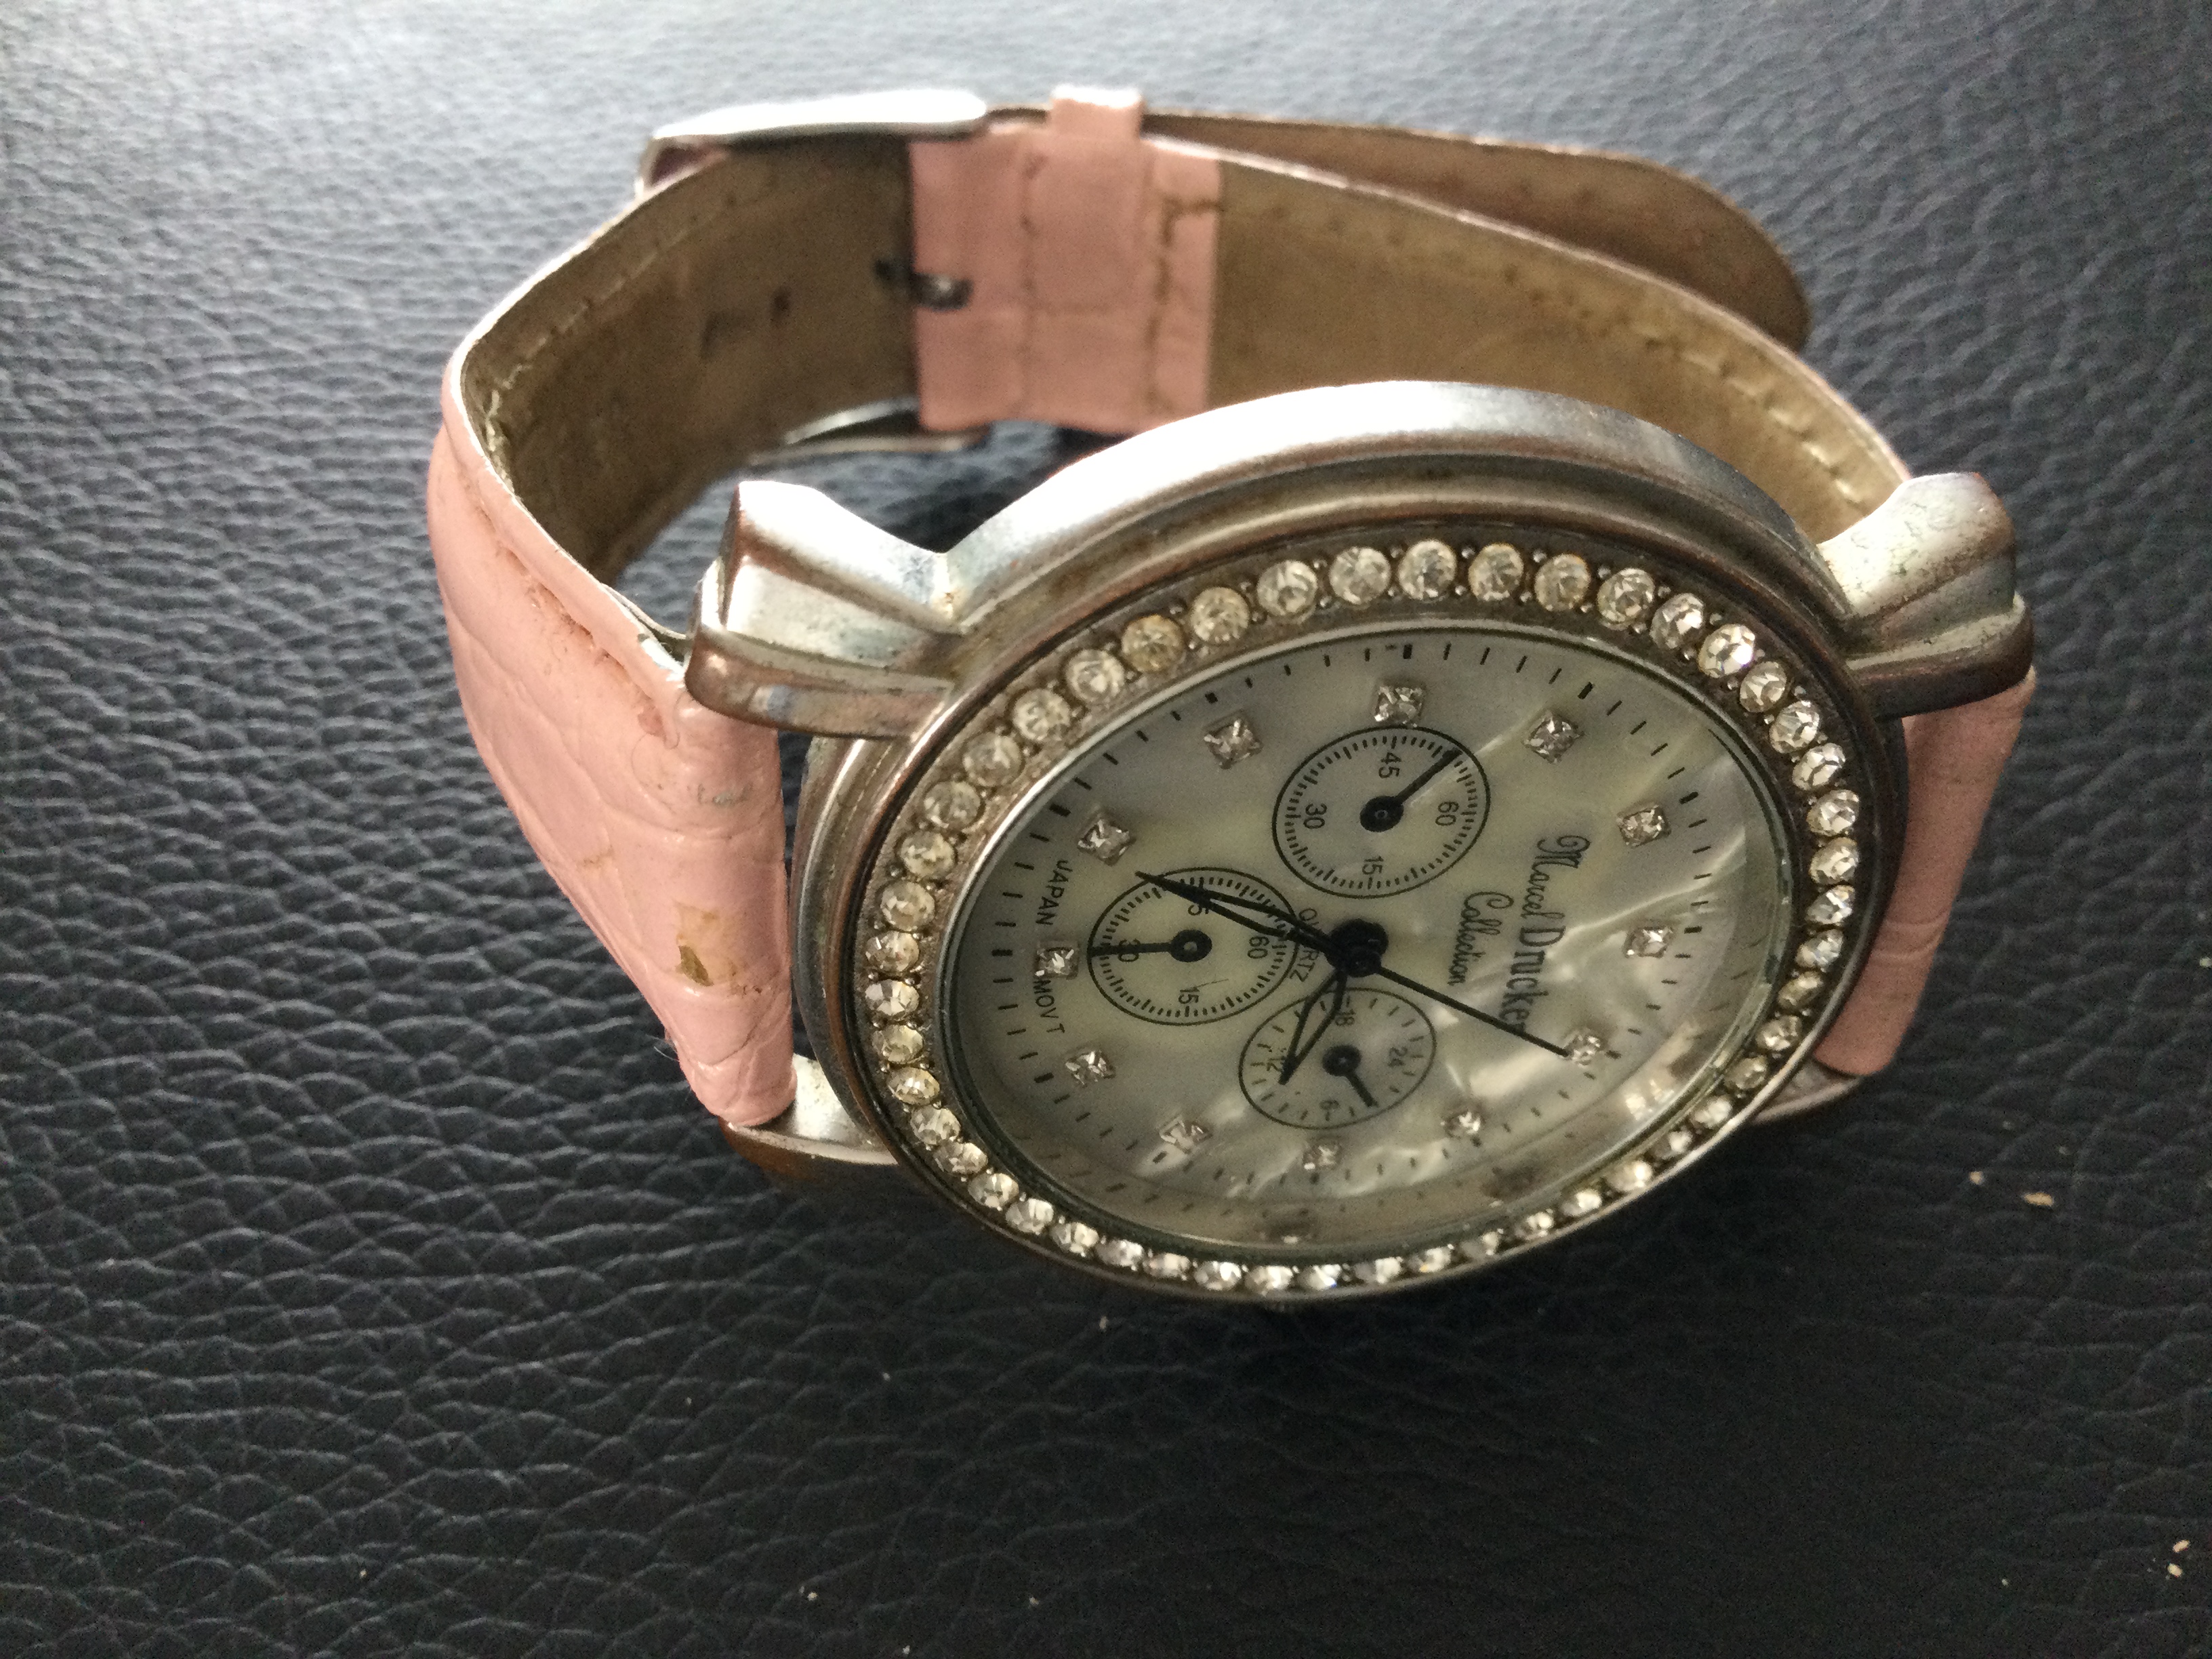 Lovely Crystal Marcel Drucker with Pink Leather Strap (GS 130) From the beautiful Marcel Drucker - Image 4 of 5